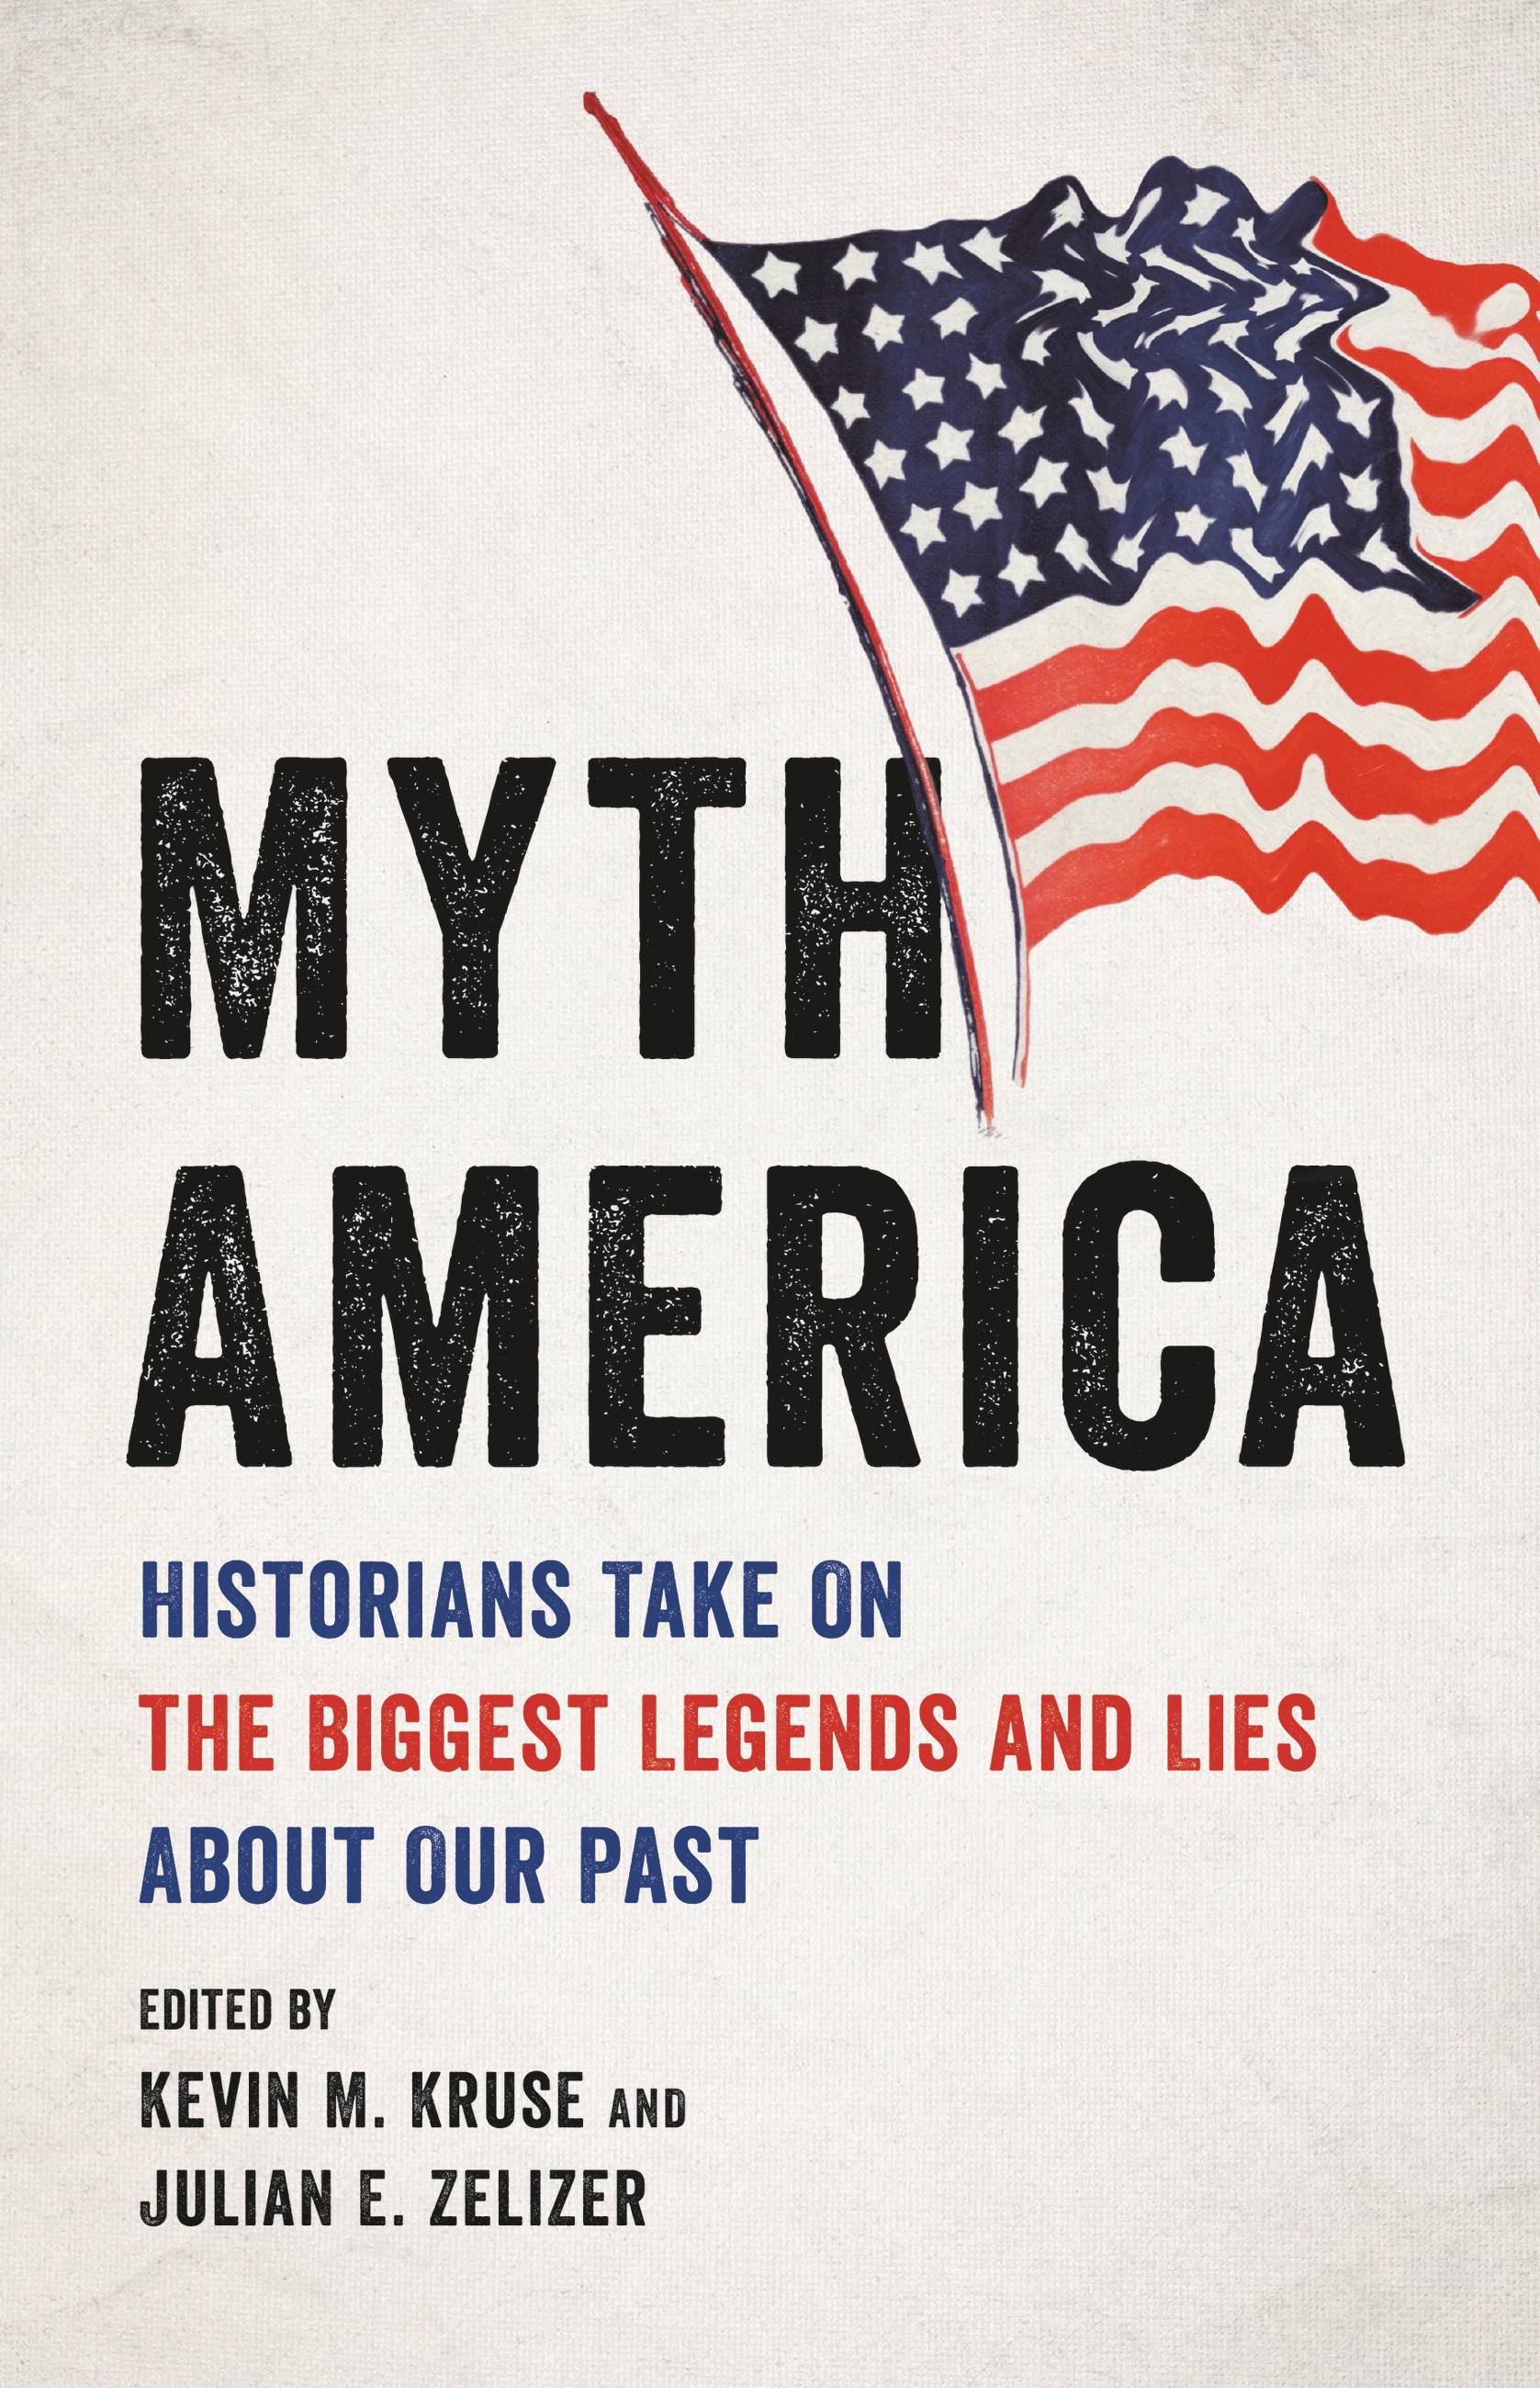 Umschlagbild für Myth America [electronic resource] : Historians Take On the Biggest Legends and Lies About Our Past